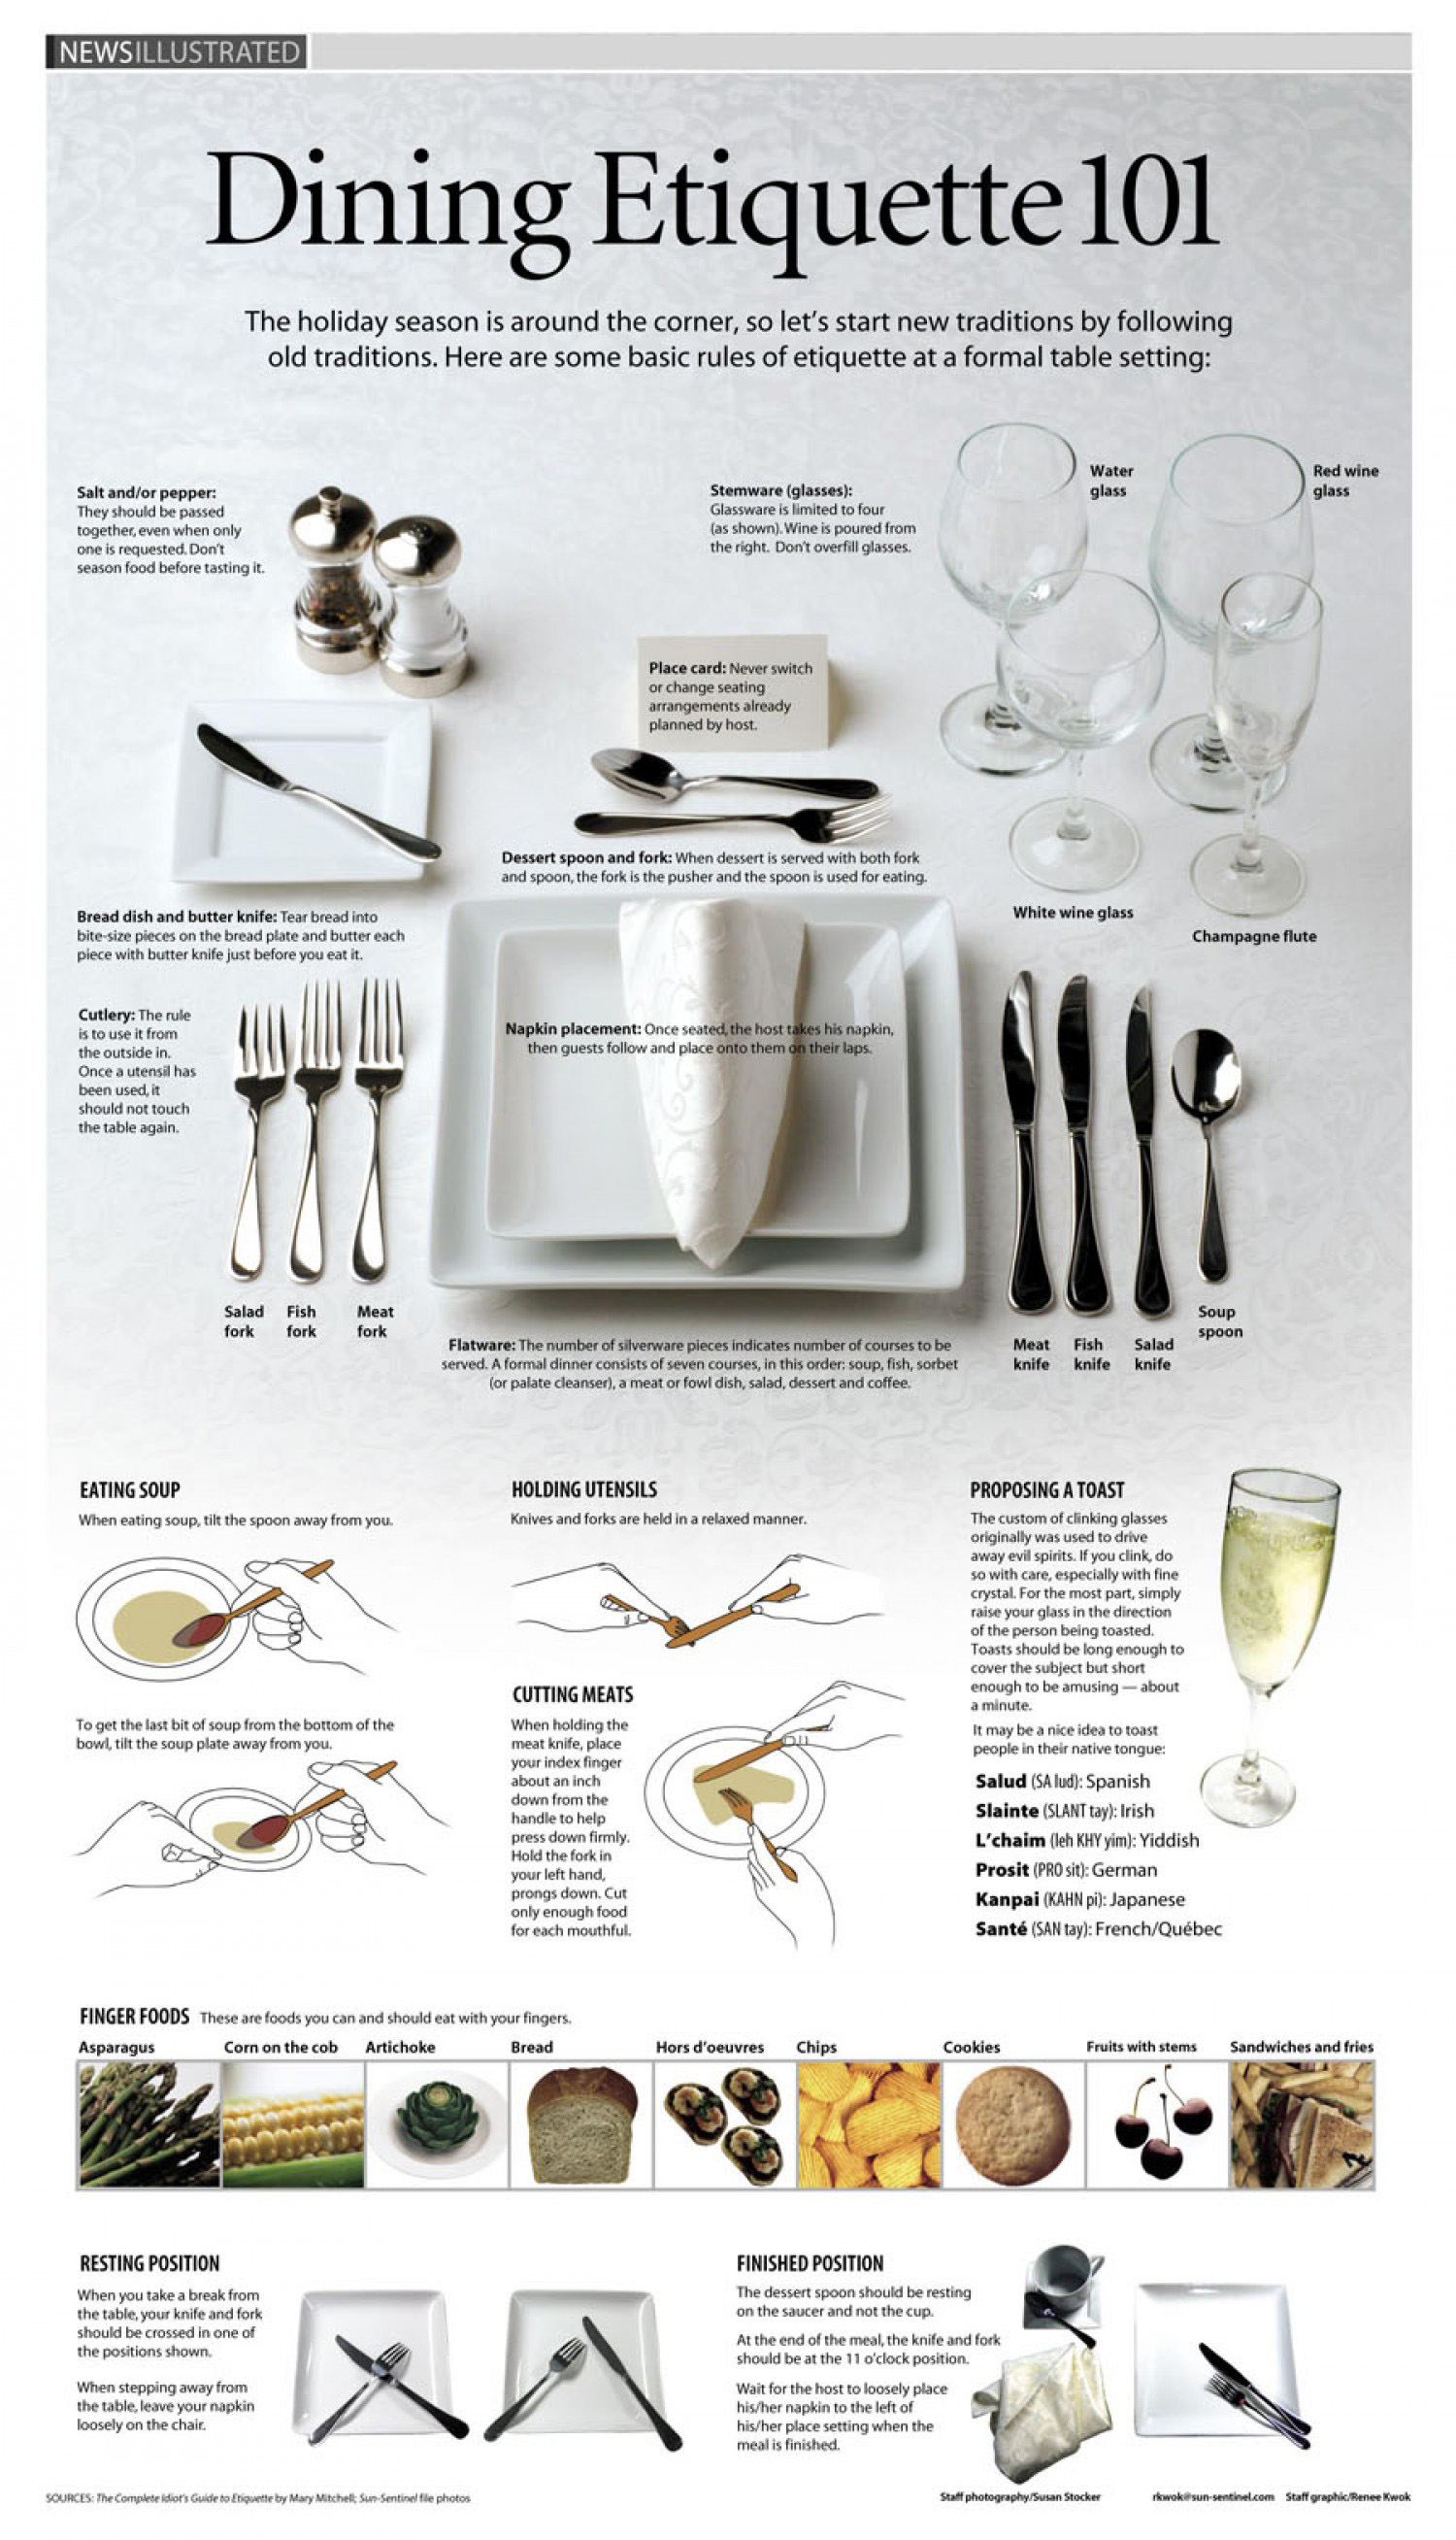 Tips for setting a table for a formal dinner, as well as fine dining dinner etiquette. Figure out what each fork, knife and spoon are used for and when. #dinner #formaldinner #tablesetting #etiquette #home 